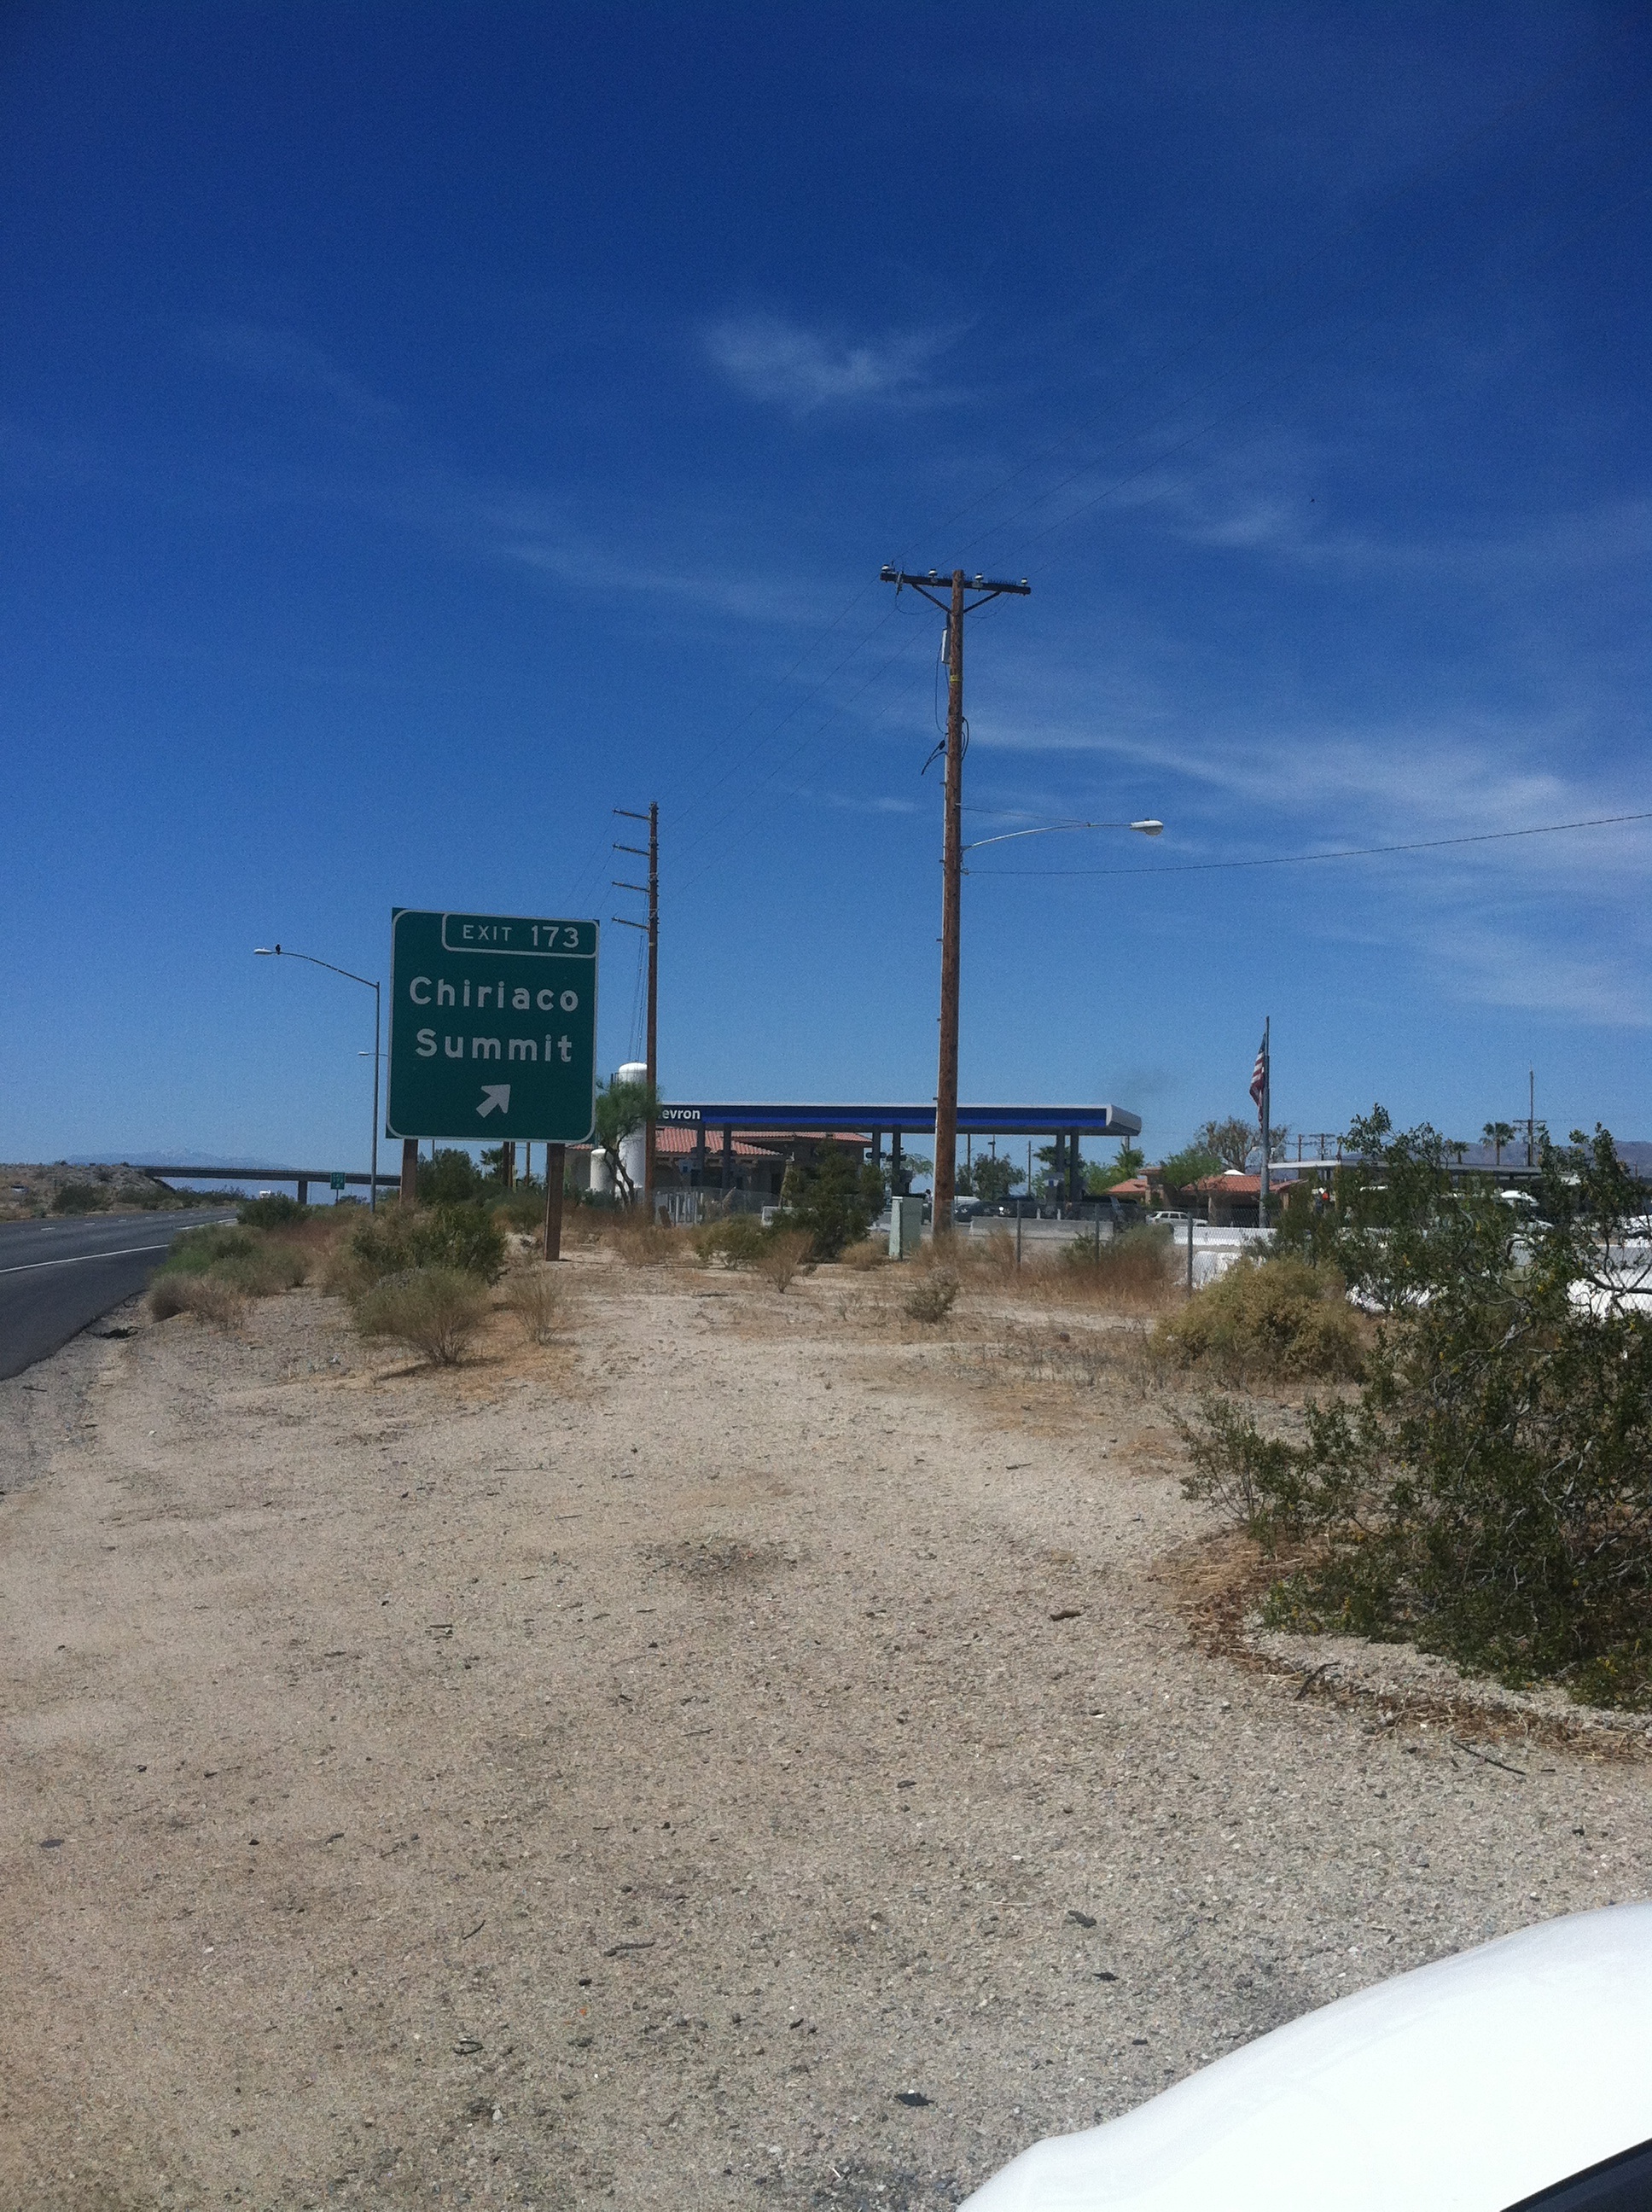 View of the Chevron when Aurora De Lucia ran out of gas on the side of the highway in the middle of the desert